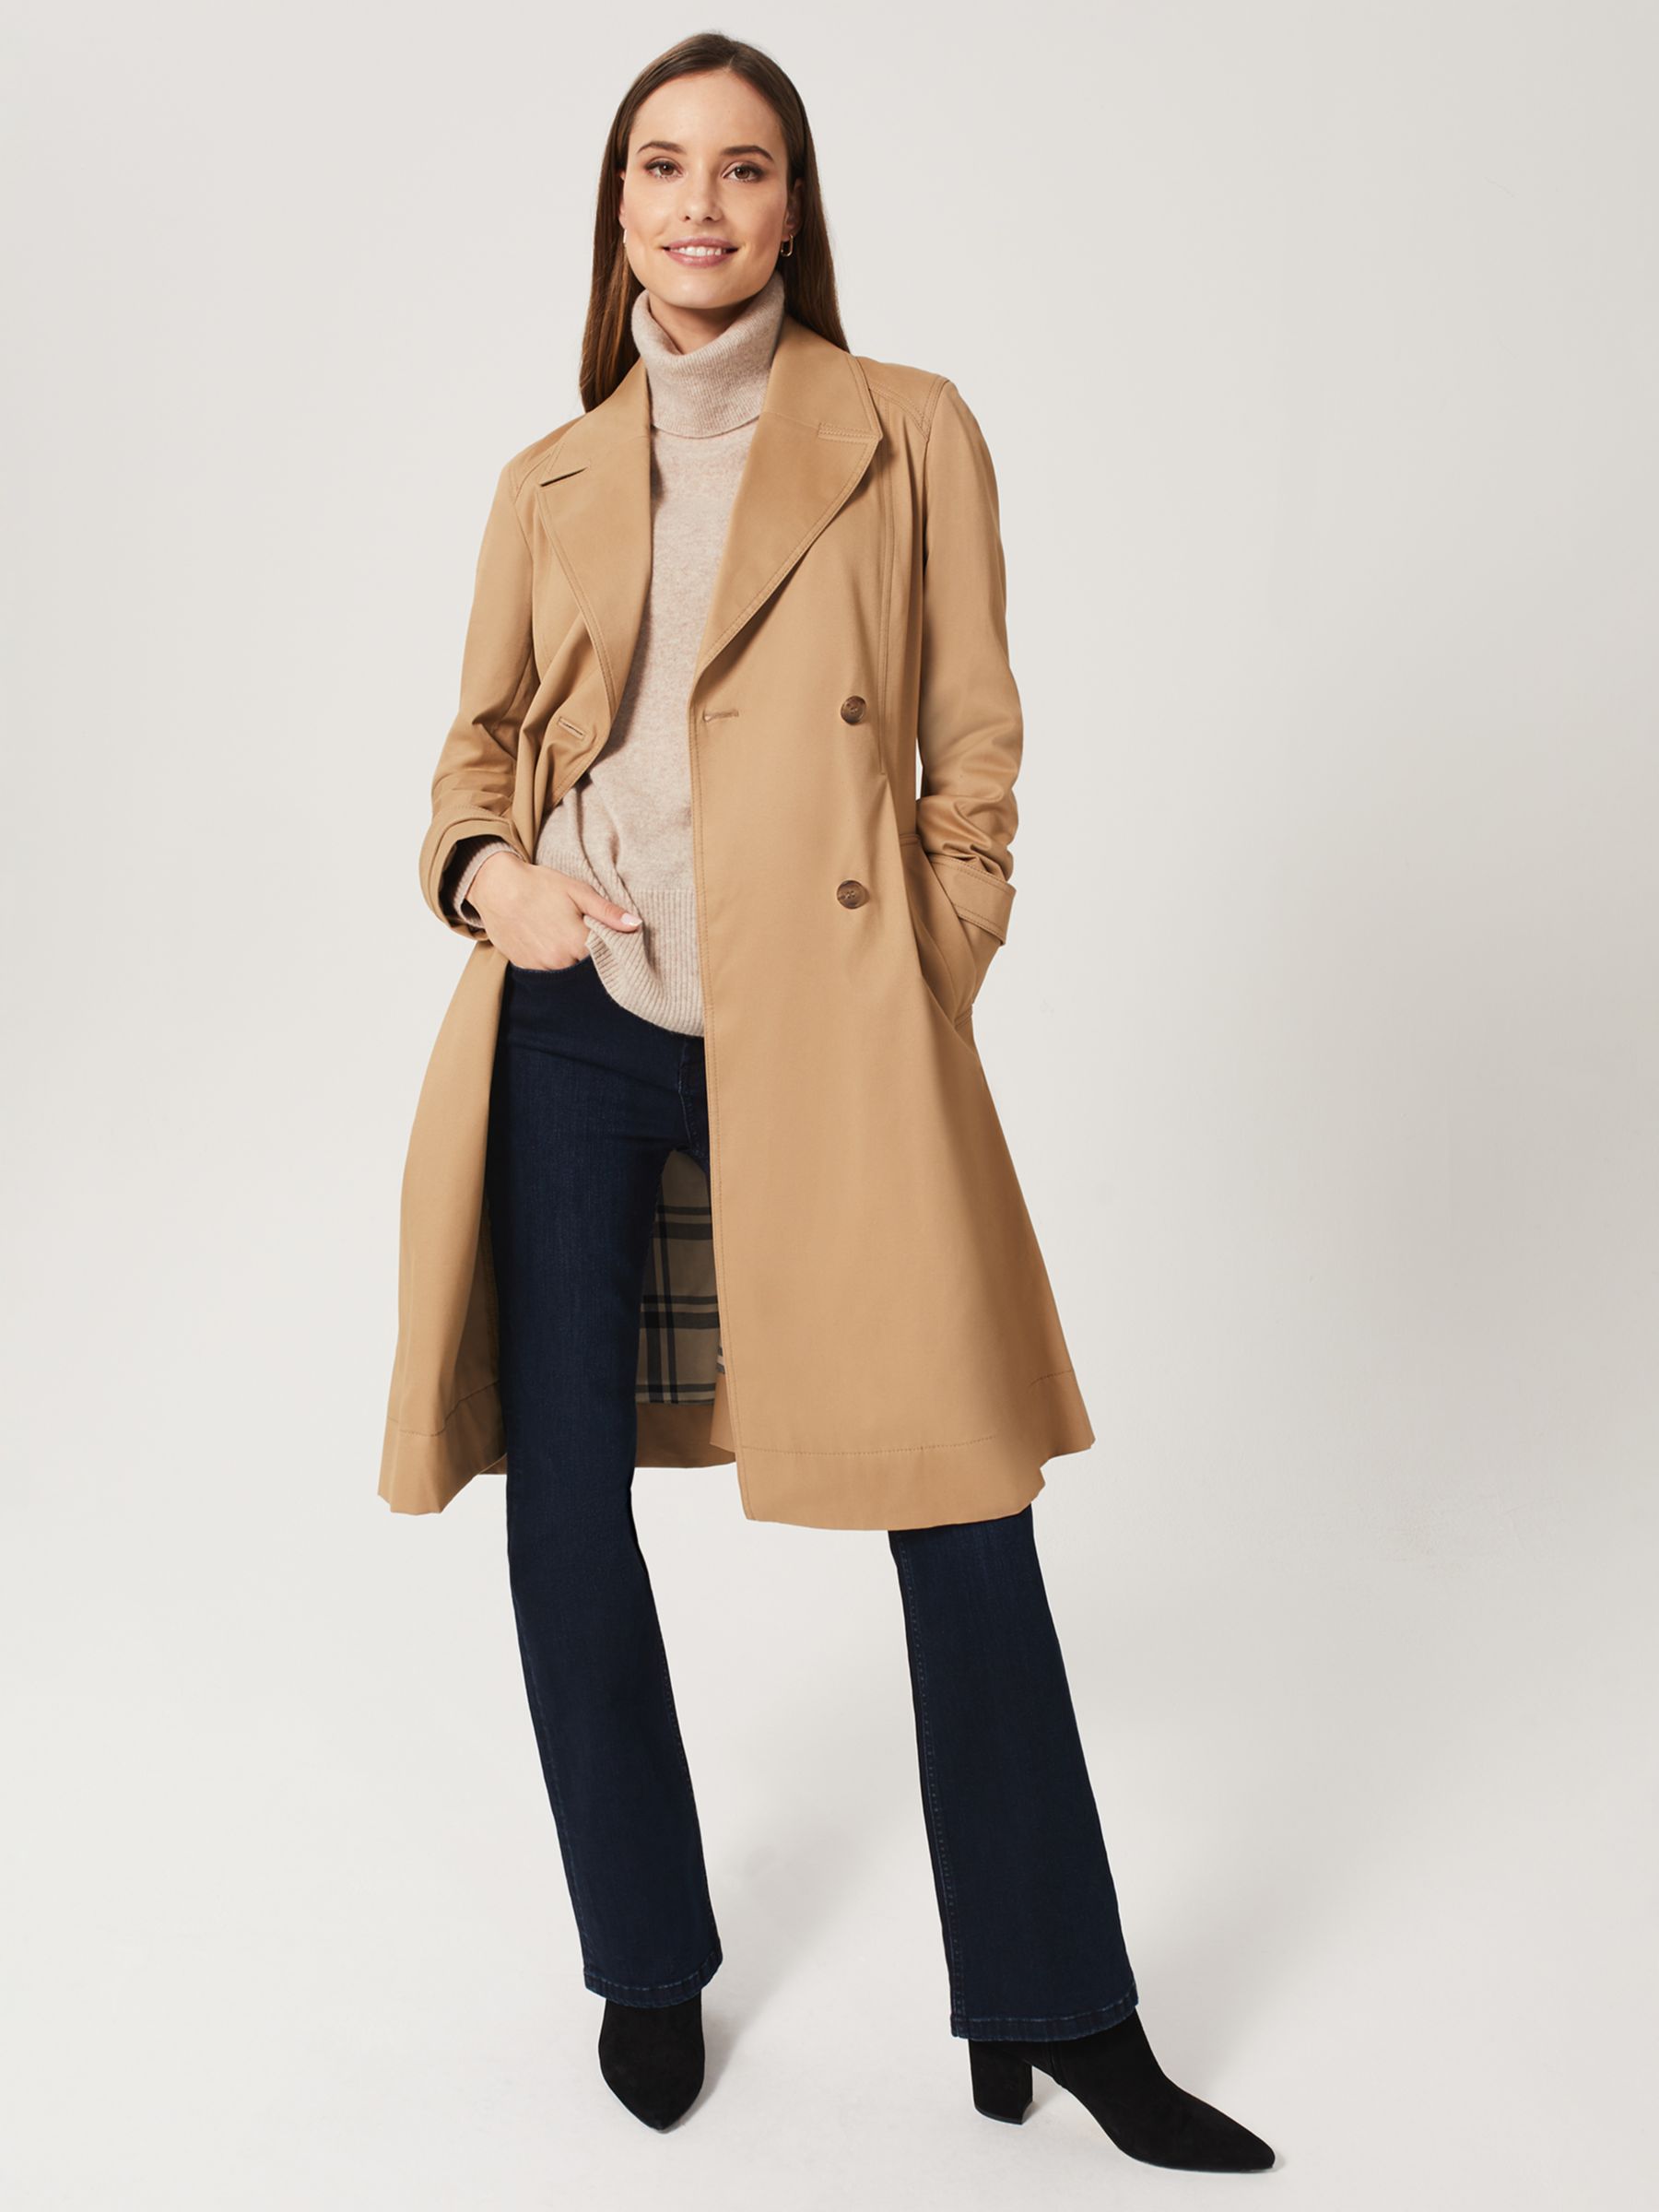 Hobbs Ashleigh Trench Coat, Fawn Beige at John Lewis & Partners